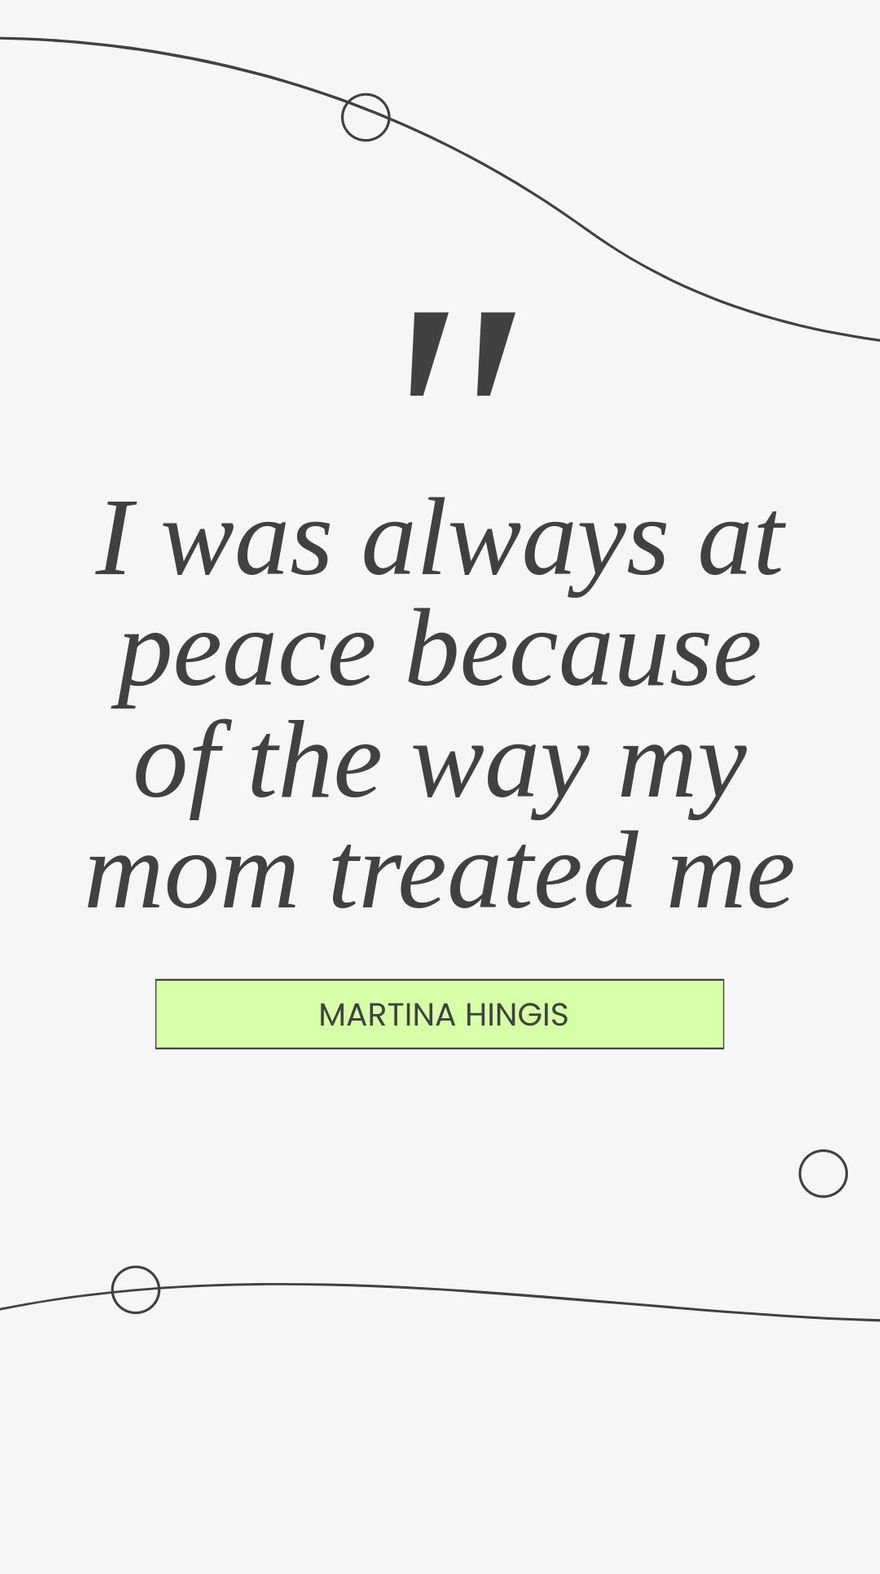 Martina Hingis - I was always at peace because of the way my mom treated me. in JPG